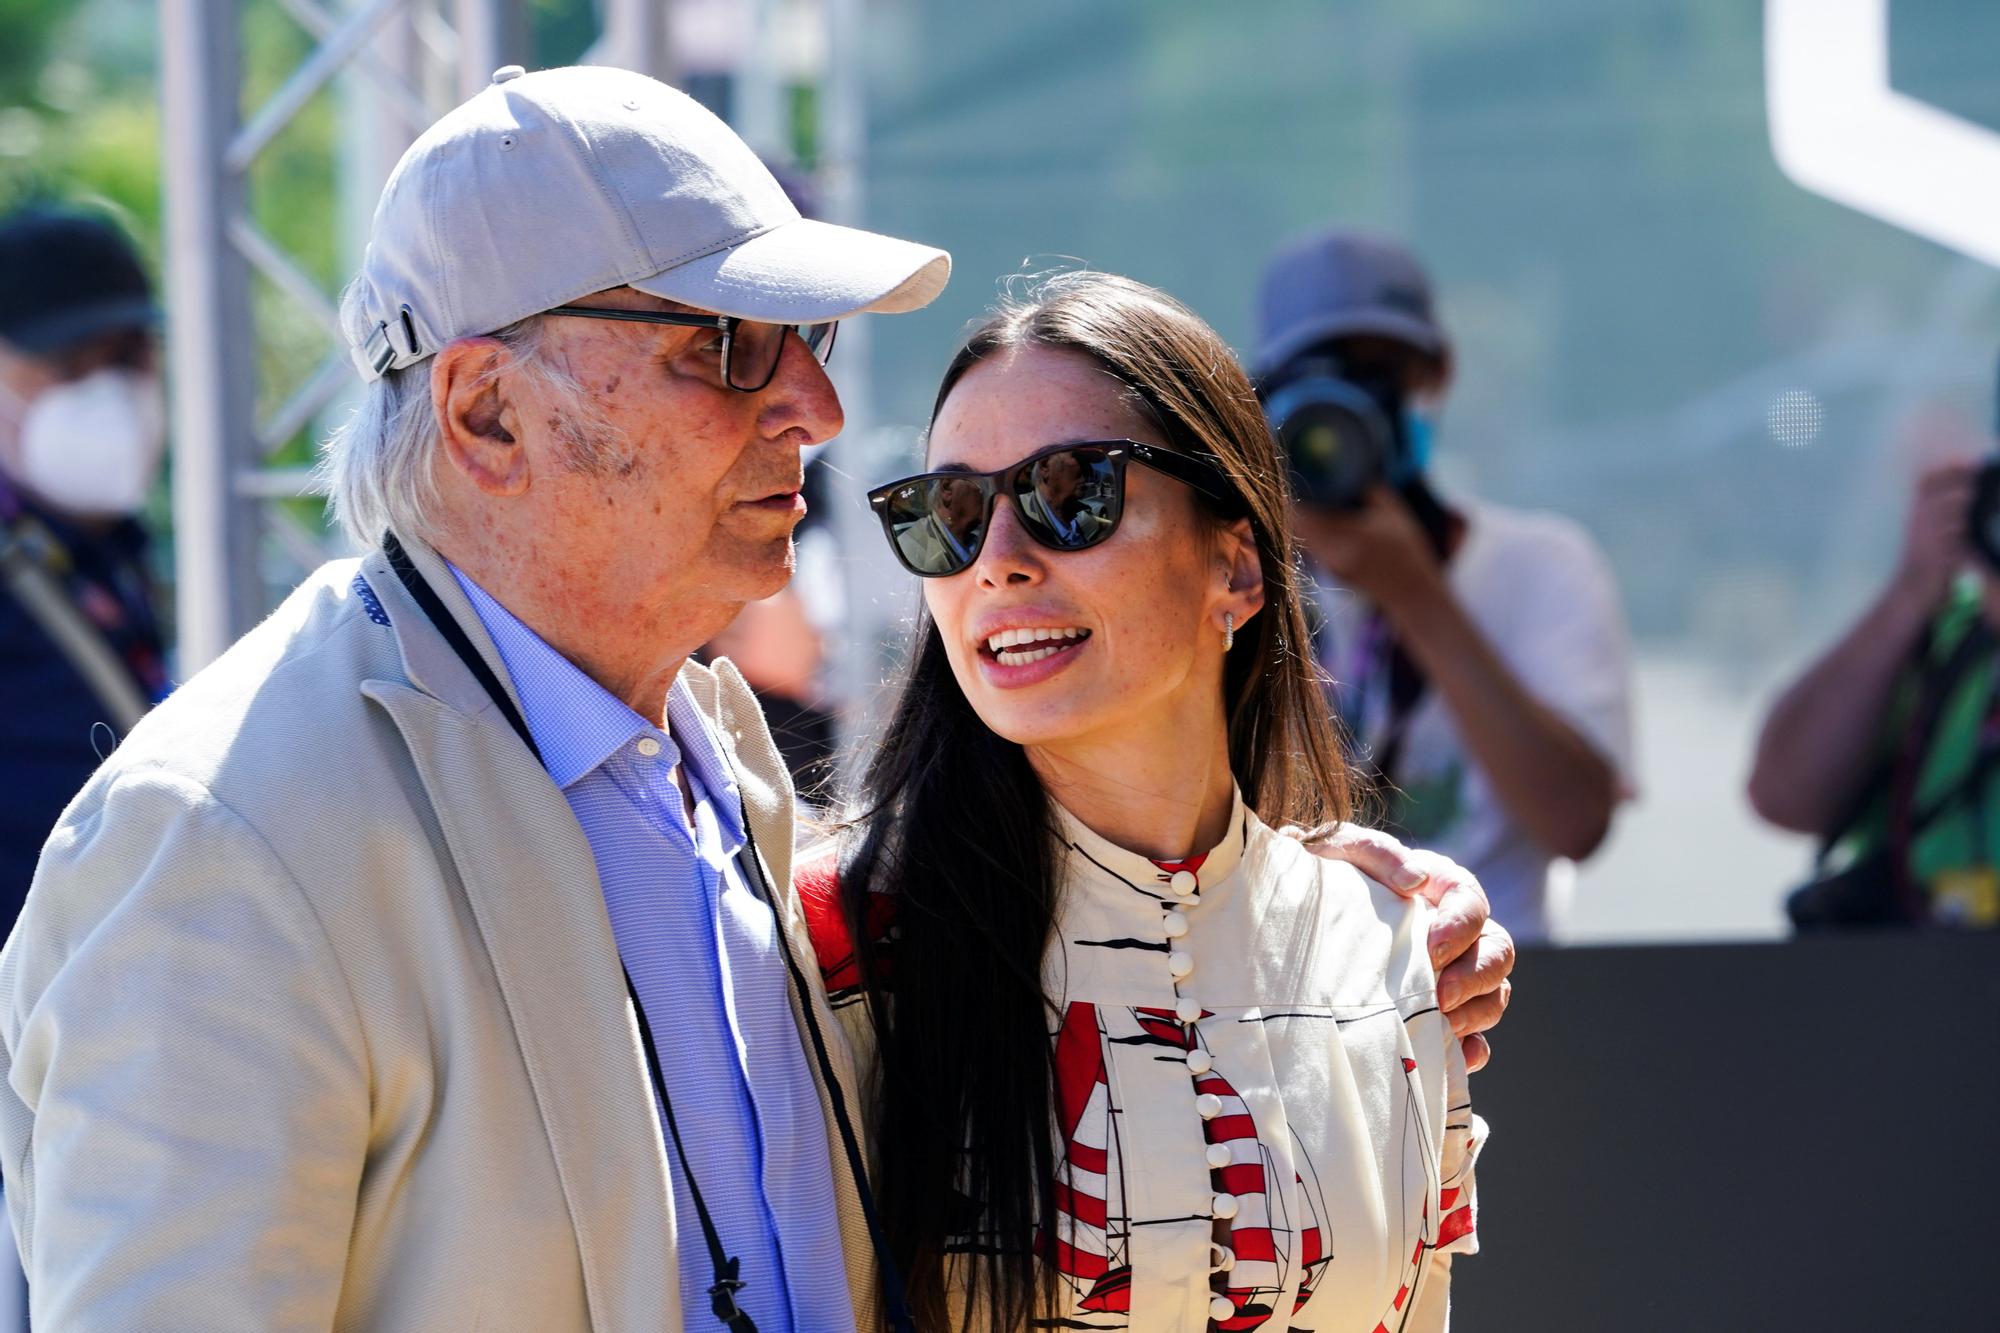 Spanish director Carlos Saura and his daughter Anna arrive at the Hotel Maria Cristina on the opening day of the 69th San Sebastian International Film Festival in San Sebastian